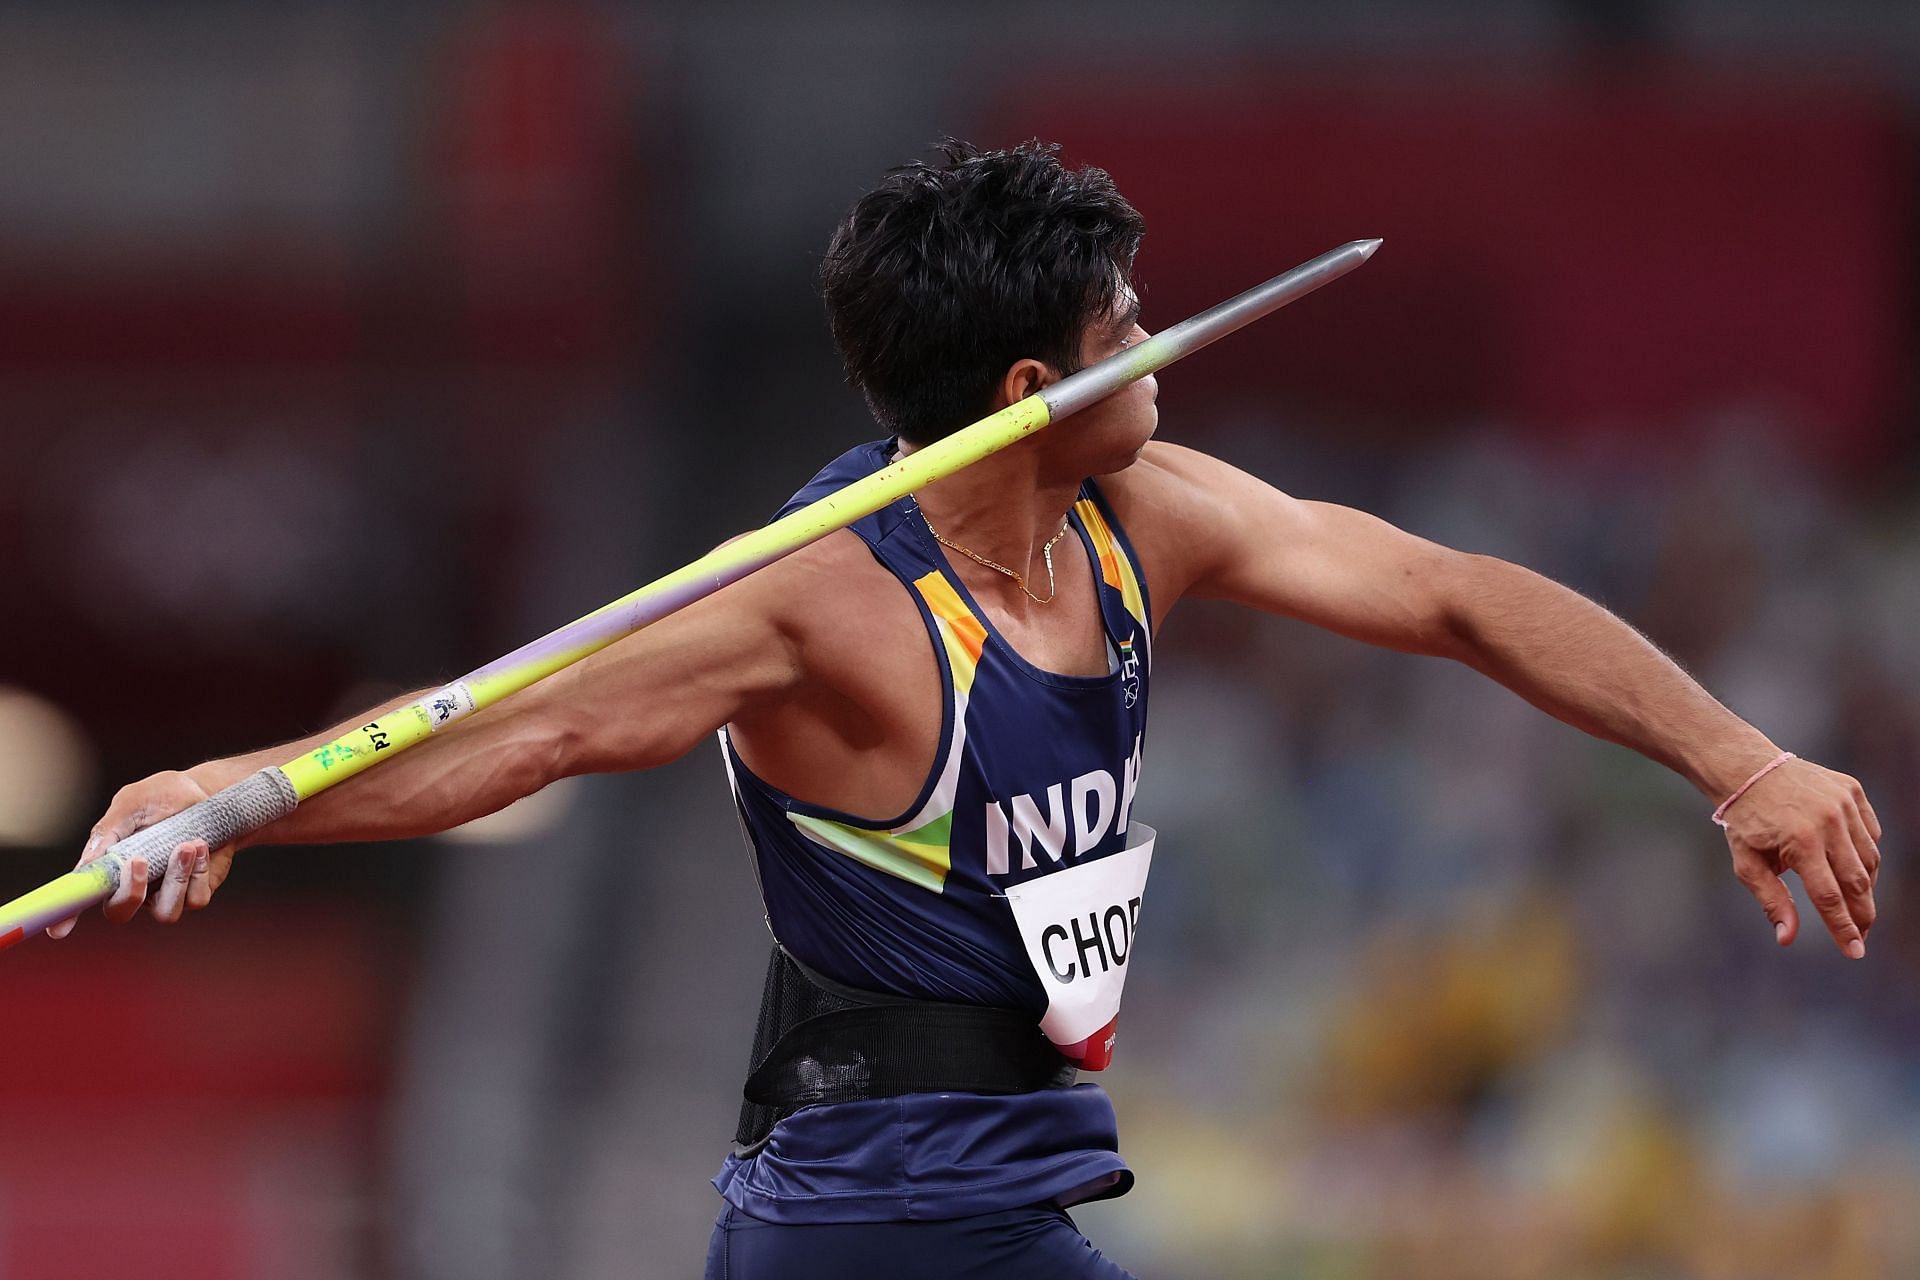 Indian javelin thrower Neeraj Chopra at the Tokyo Olympics. (PC: Getty Images)